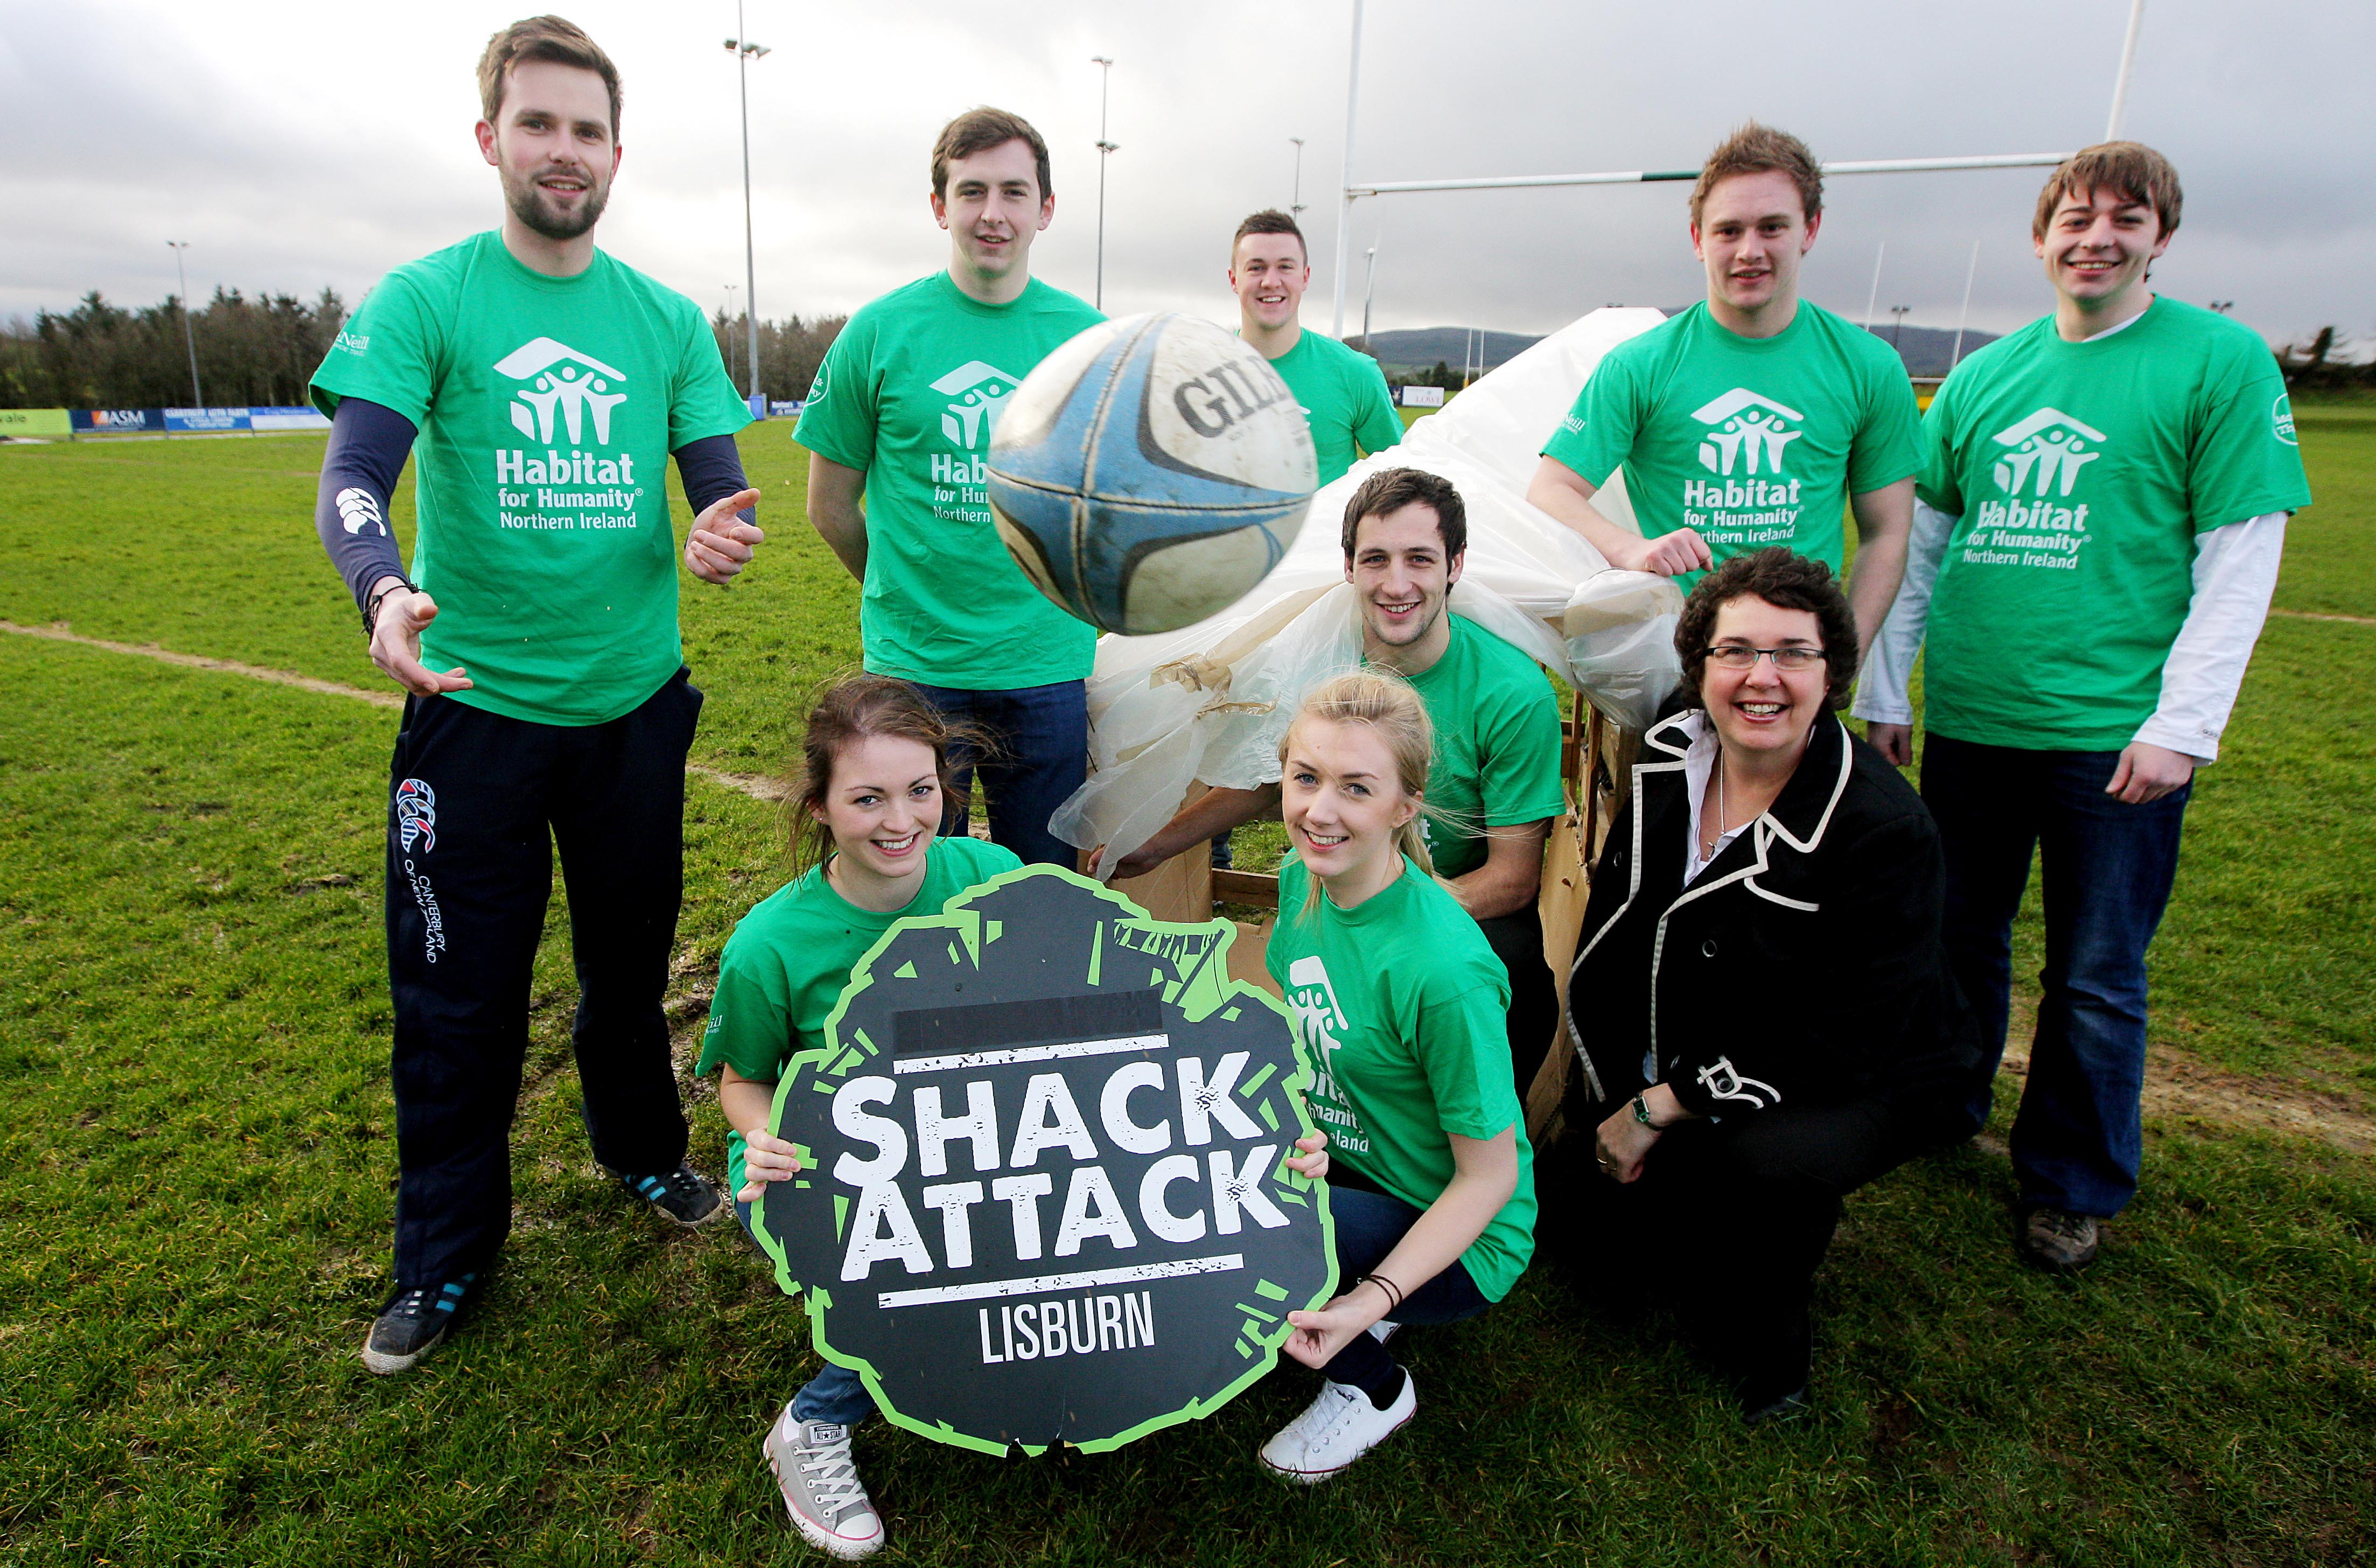 Members of Ballynahinch Rugby Club holding a sign promoting Shack Attack 2014